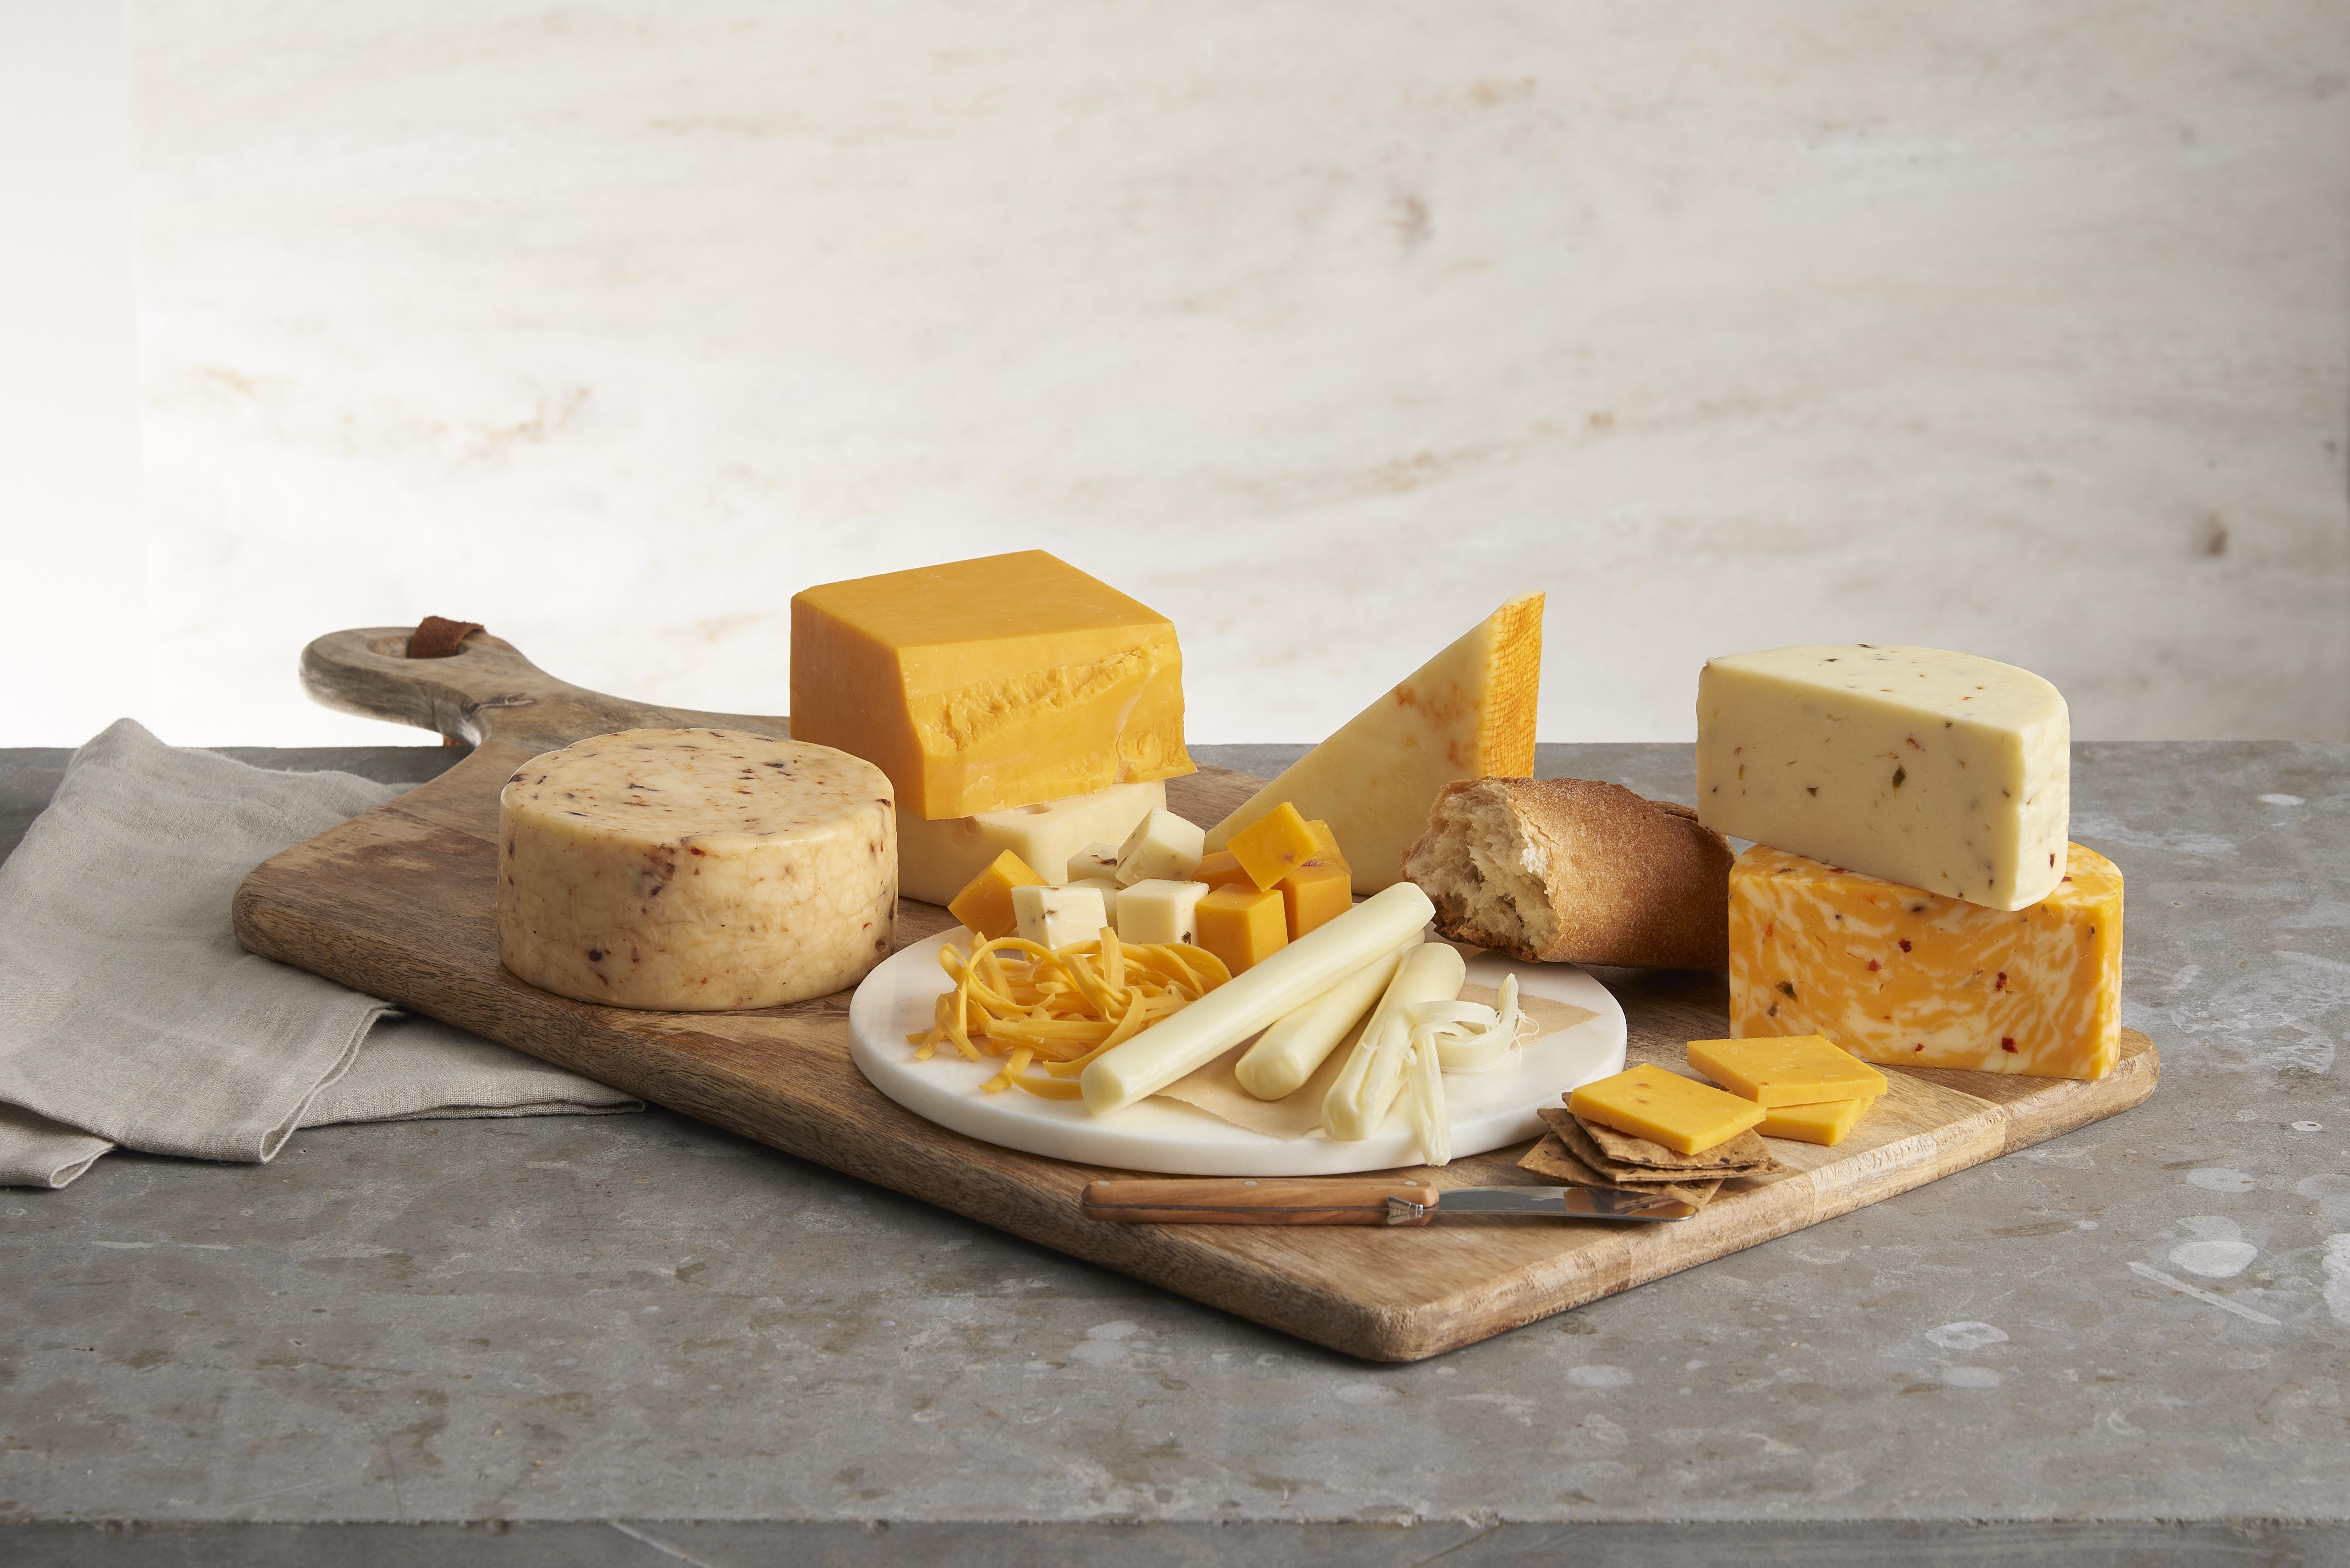 Selection of cheeses on a wooden board